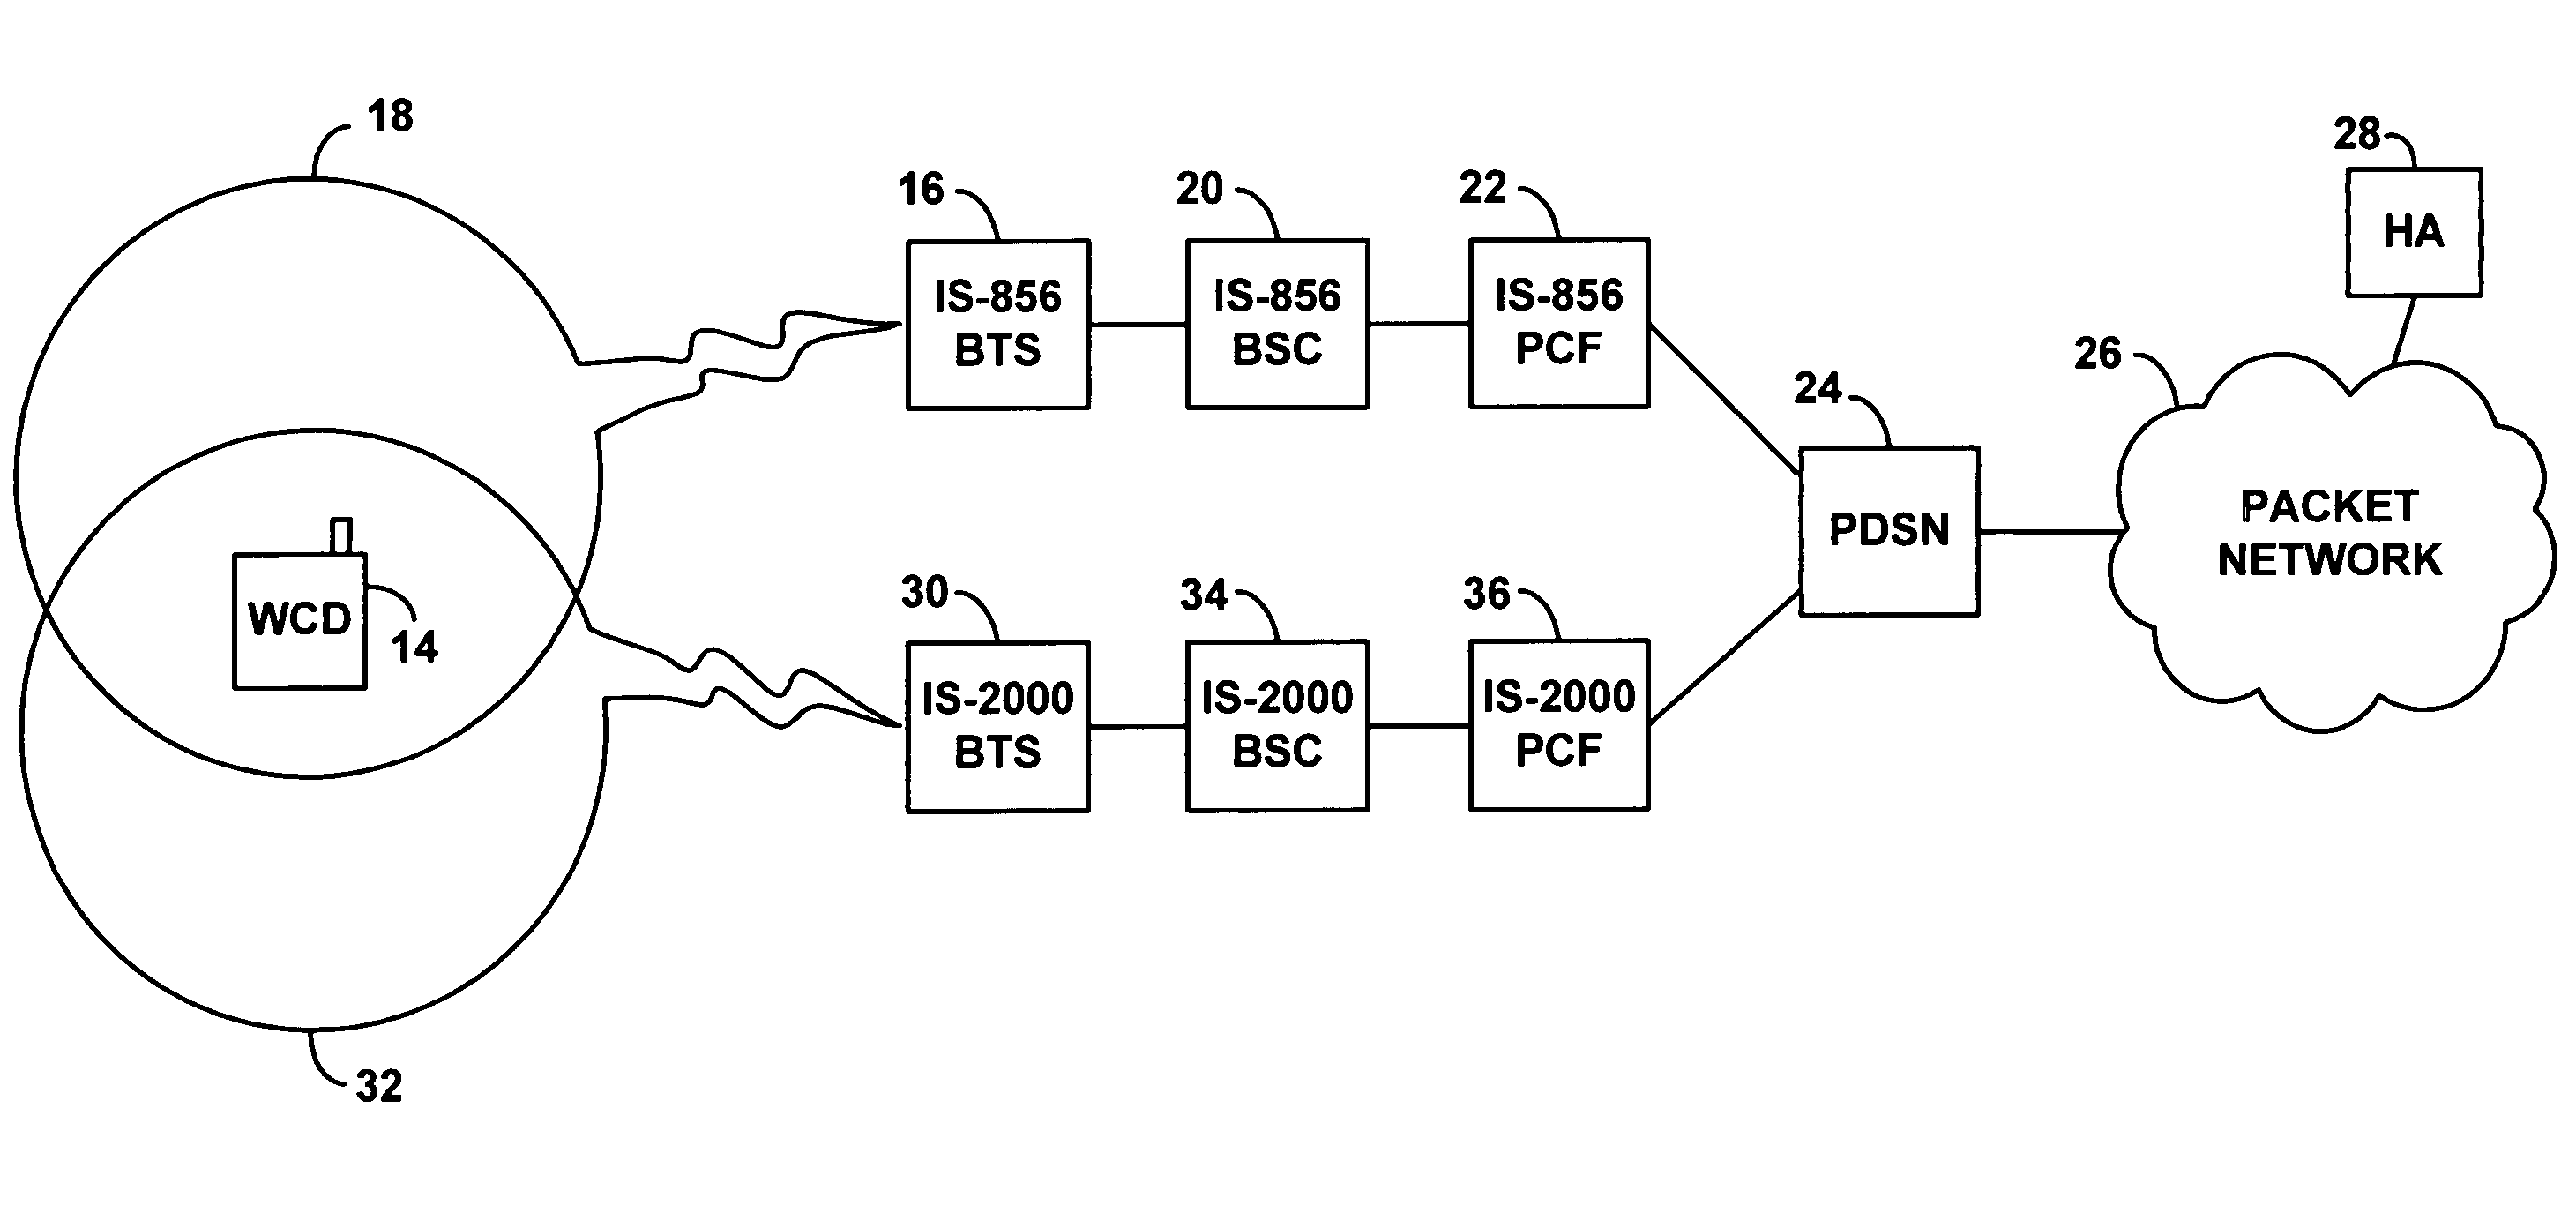 Method and apparatus for transitioning between radio link protocols in a packet-based real-time media communication system